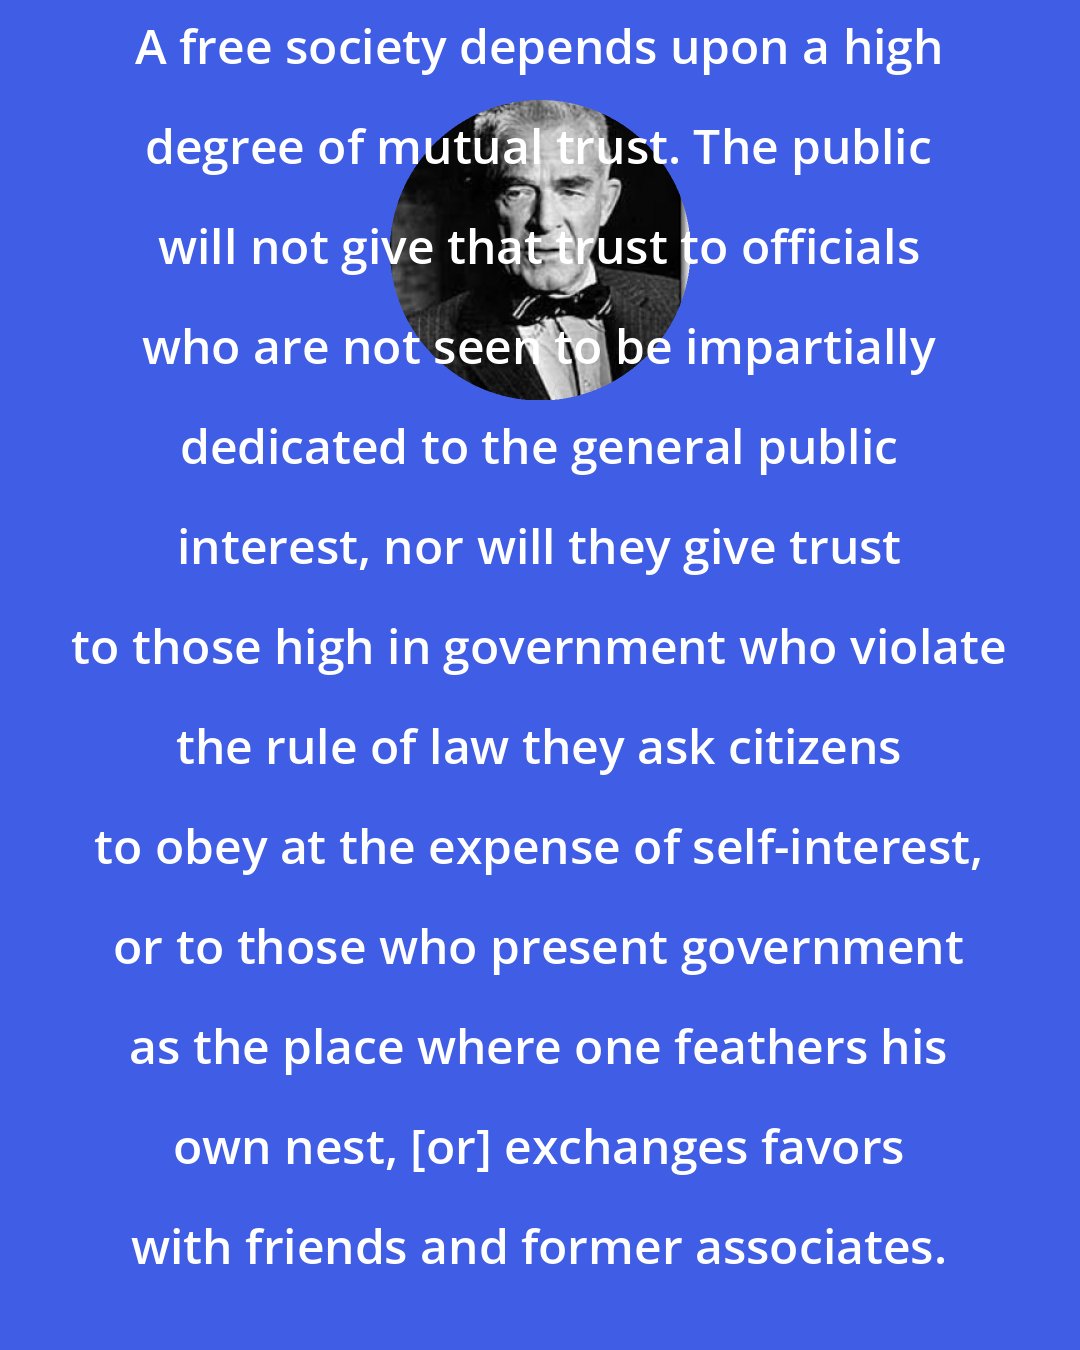 Archibald Cox: A free society depends upon a high degree of mutual trust. The public will not give that trust to officials who are not seen to be impartially dedicated to the general public interest, nor will they give trust to those high in government who violate the rule of law they ask citizens to obey at the expense of self-interest, or to those who present government as the place where one feathers his own nest, [or] exchanges favors with friends and former associates.